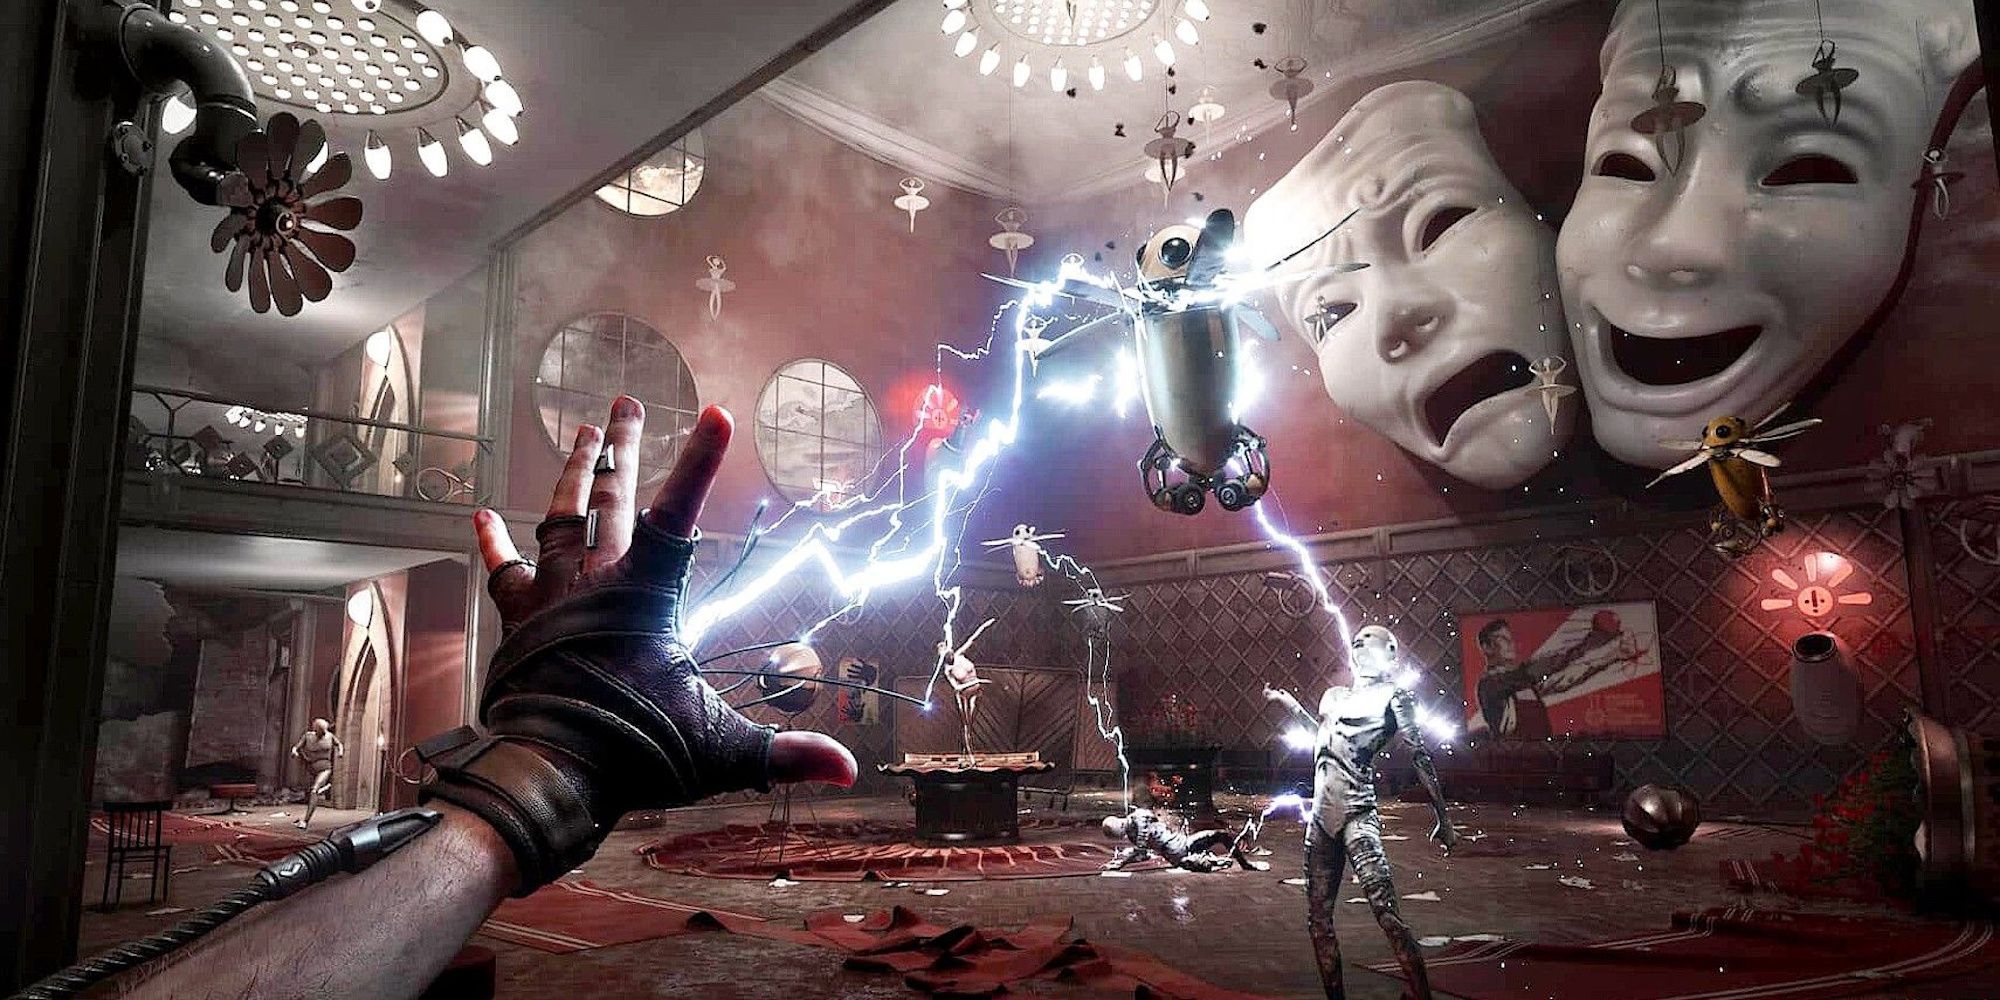 P-3 shooting a burst of electrical shock current into a robot in the air, which zaps other robots on the floor in a theater area in Atomic Heart.